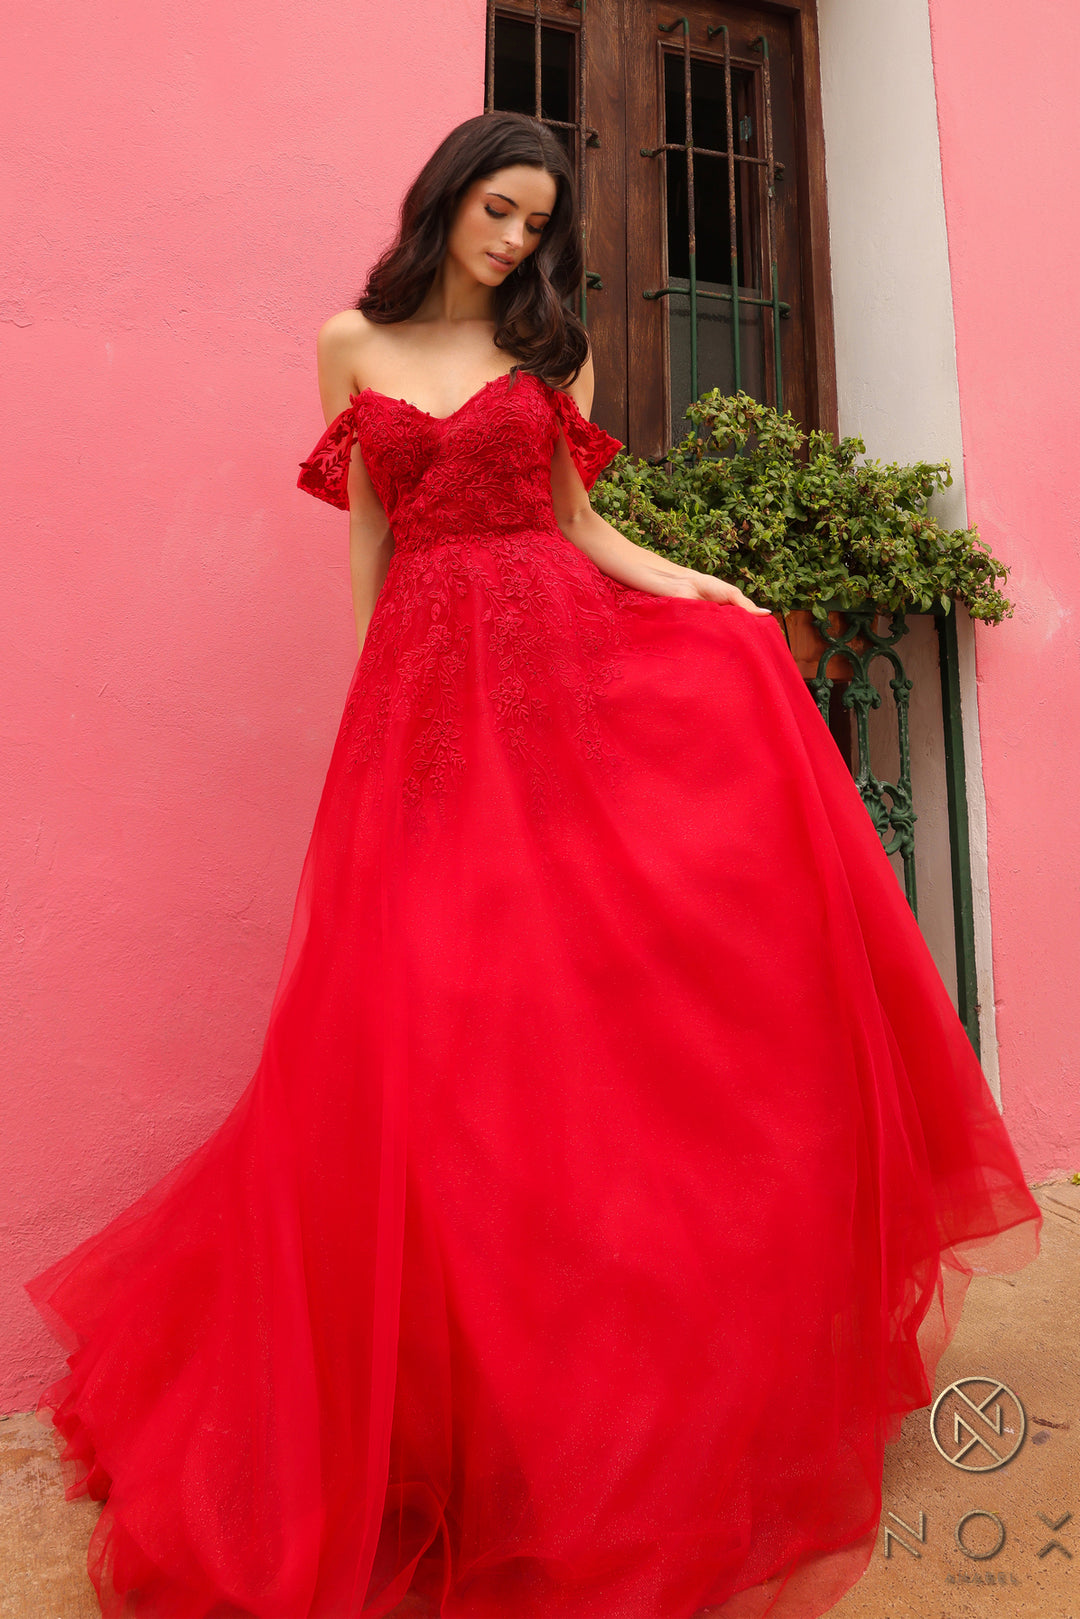 Applique Off Shoulder Ball Gown by Nox Anabel R1303